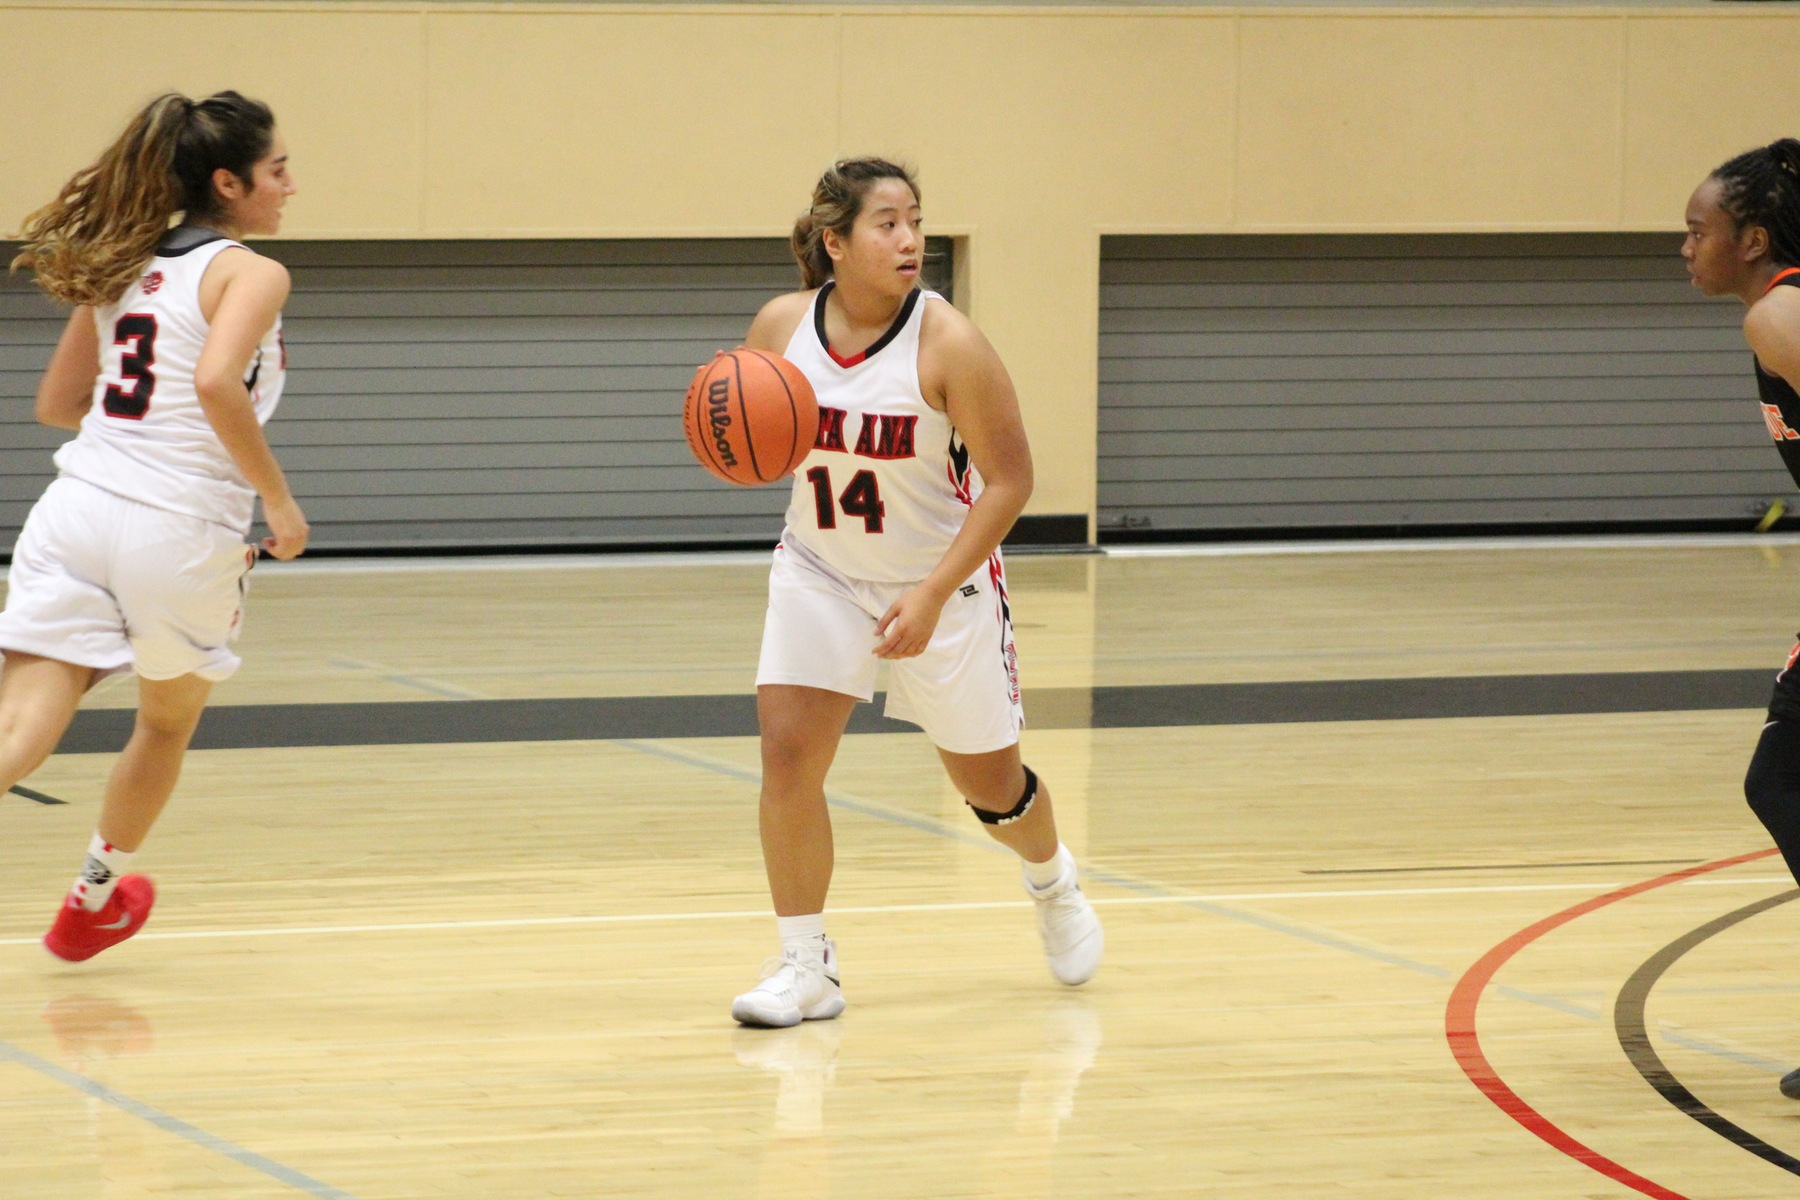 Lady Dons Fall Short of Upset Against RCC